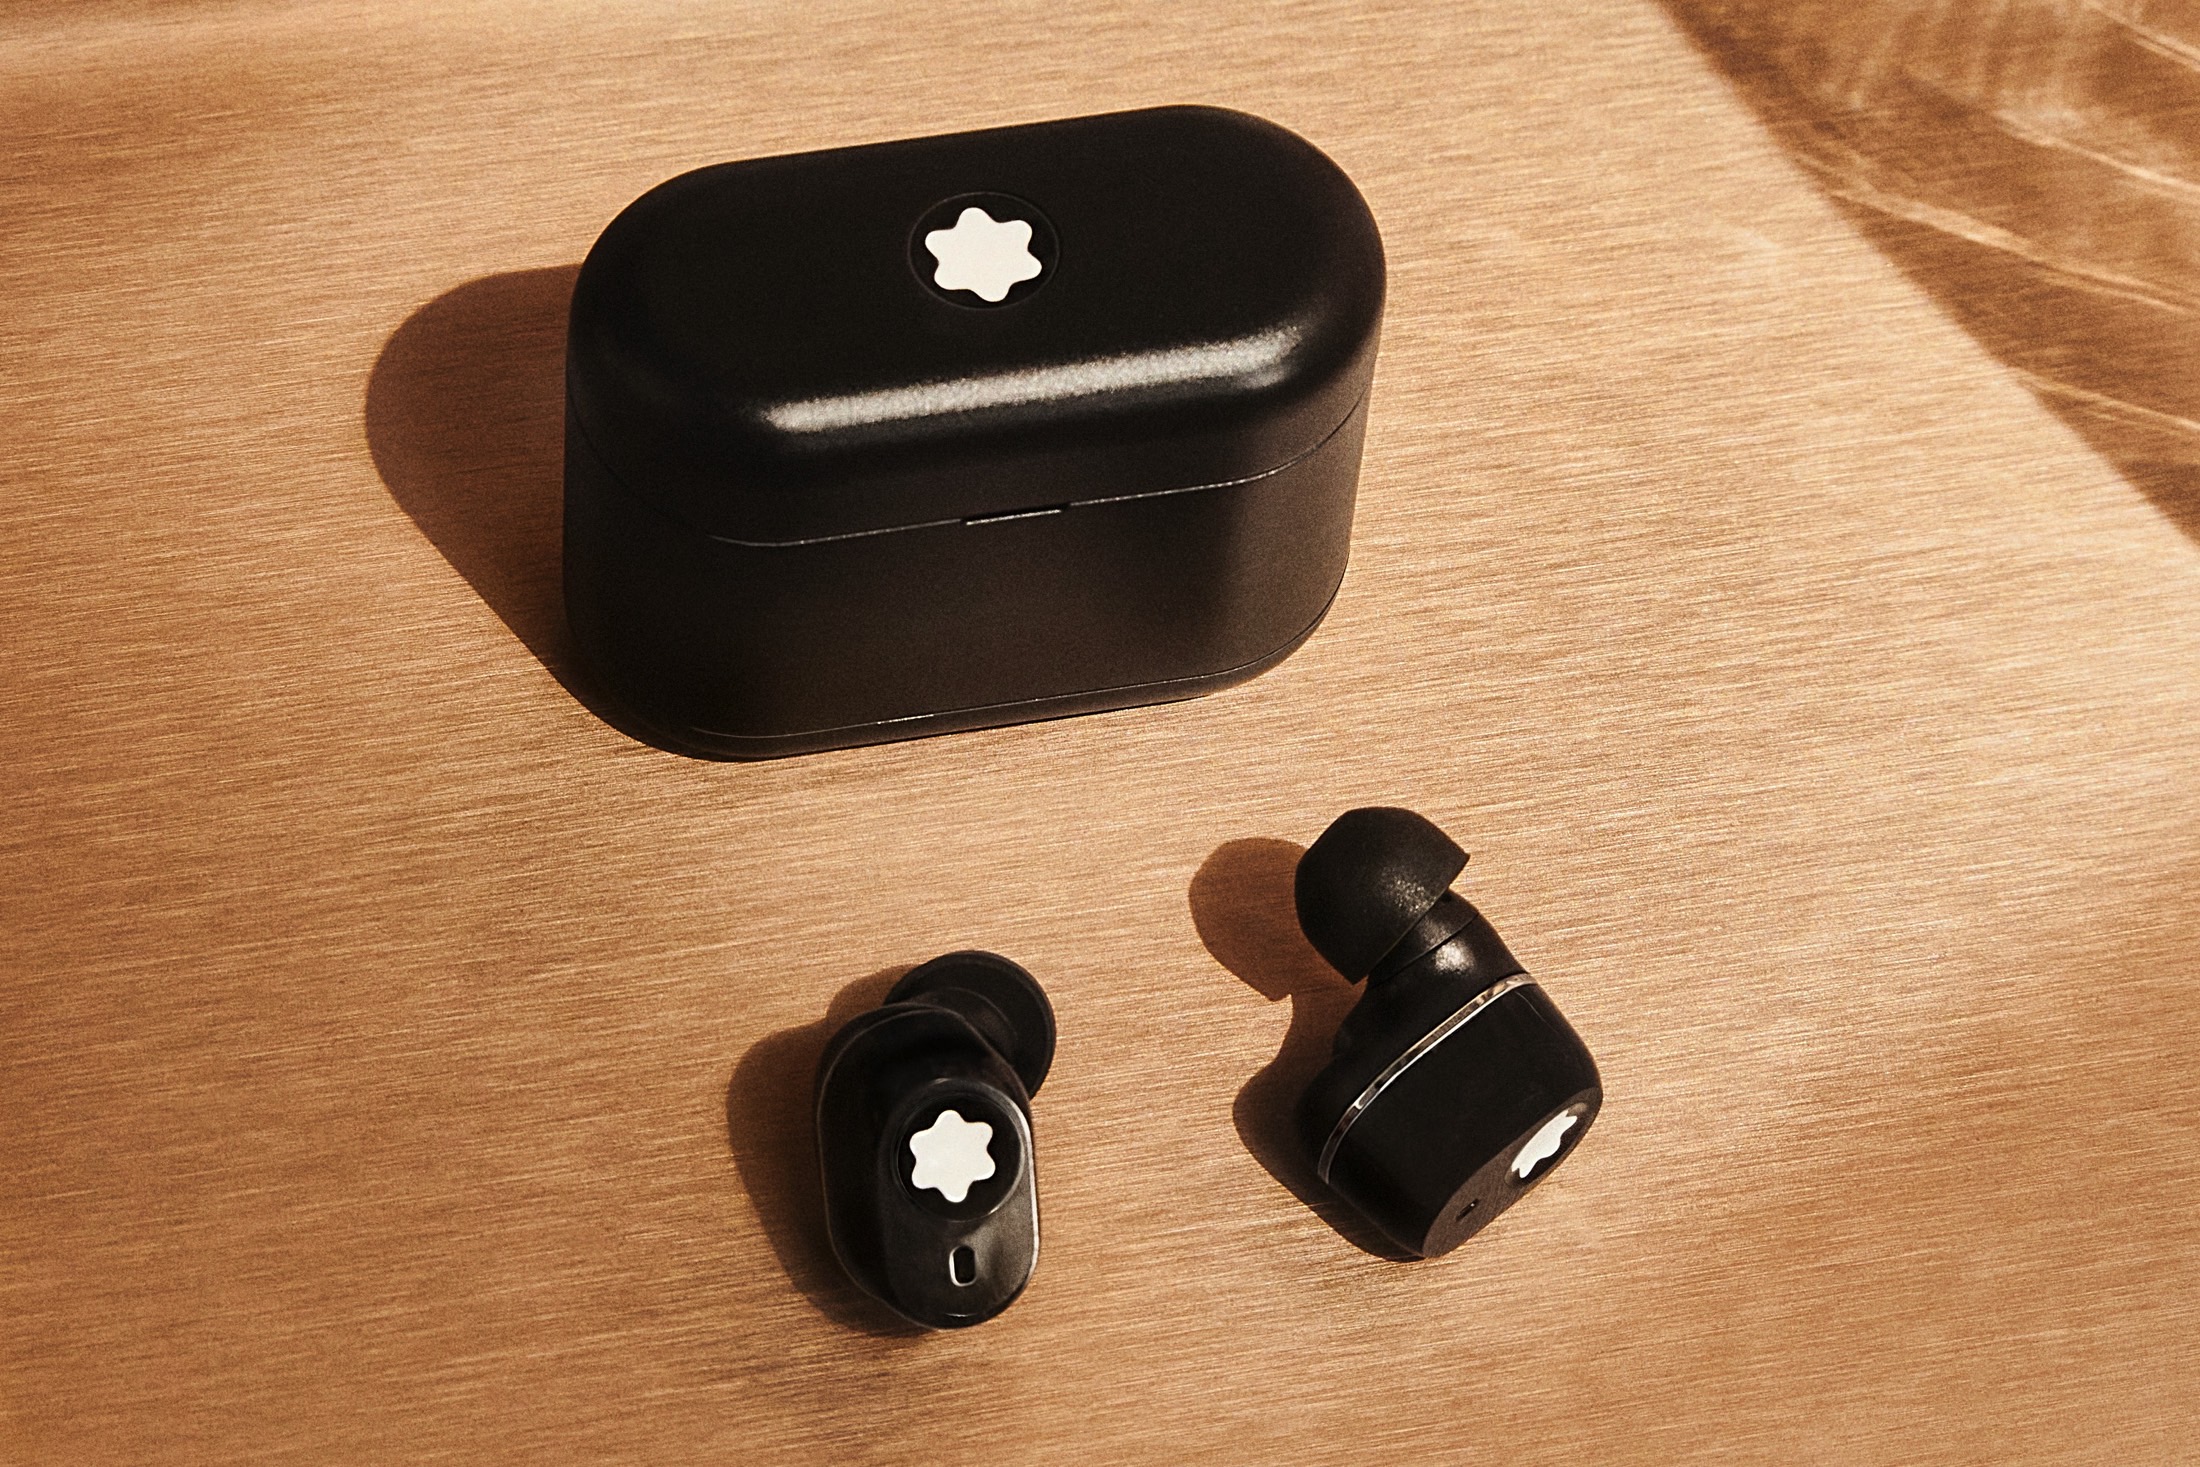 Montblanc MTB 03 wireless earbuds with charging case.